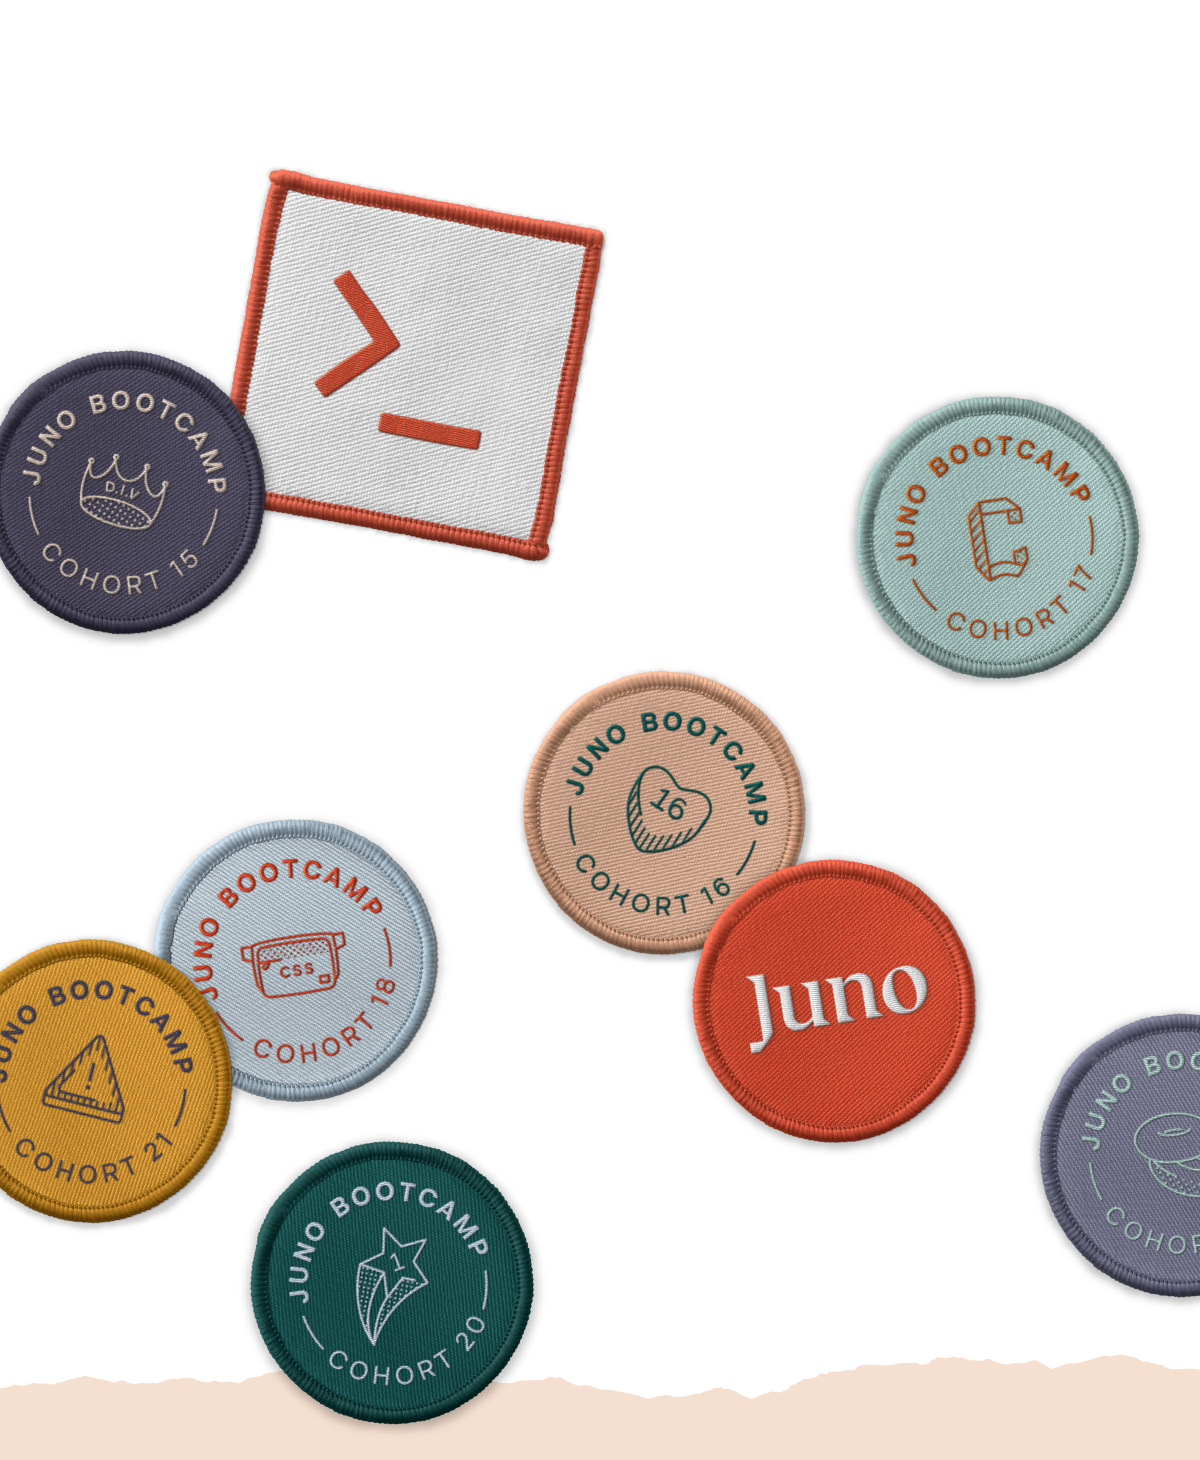 Embroidered patches swag design for Juno Web Development Bootcamp (visual identity exploration)